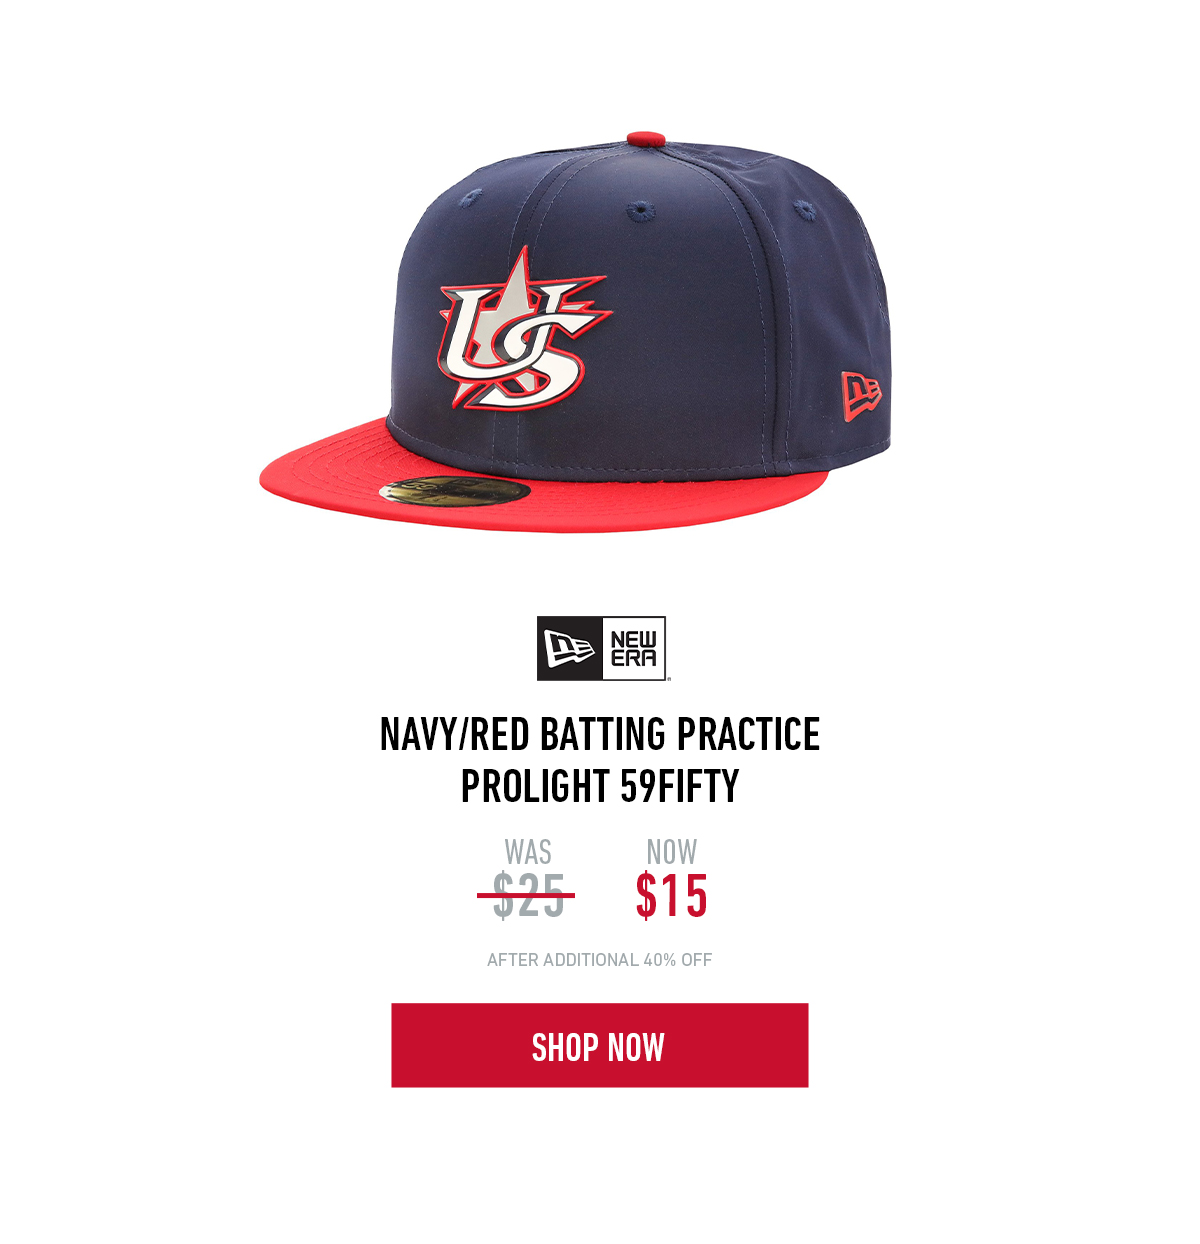 Navy/Red Batting Practice Prolight 59FIFTY